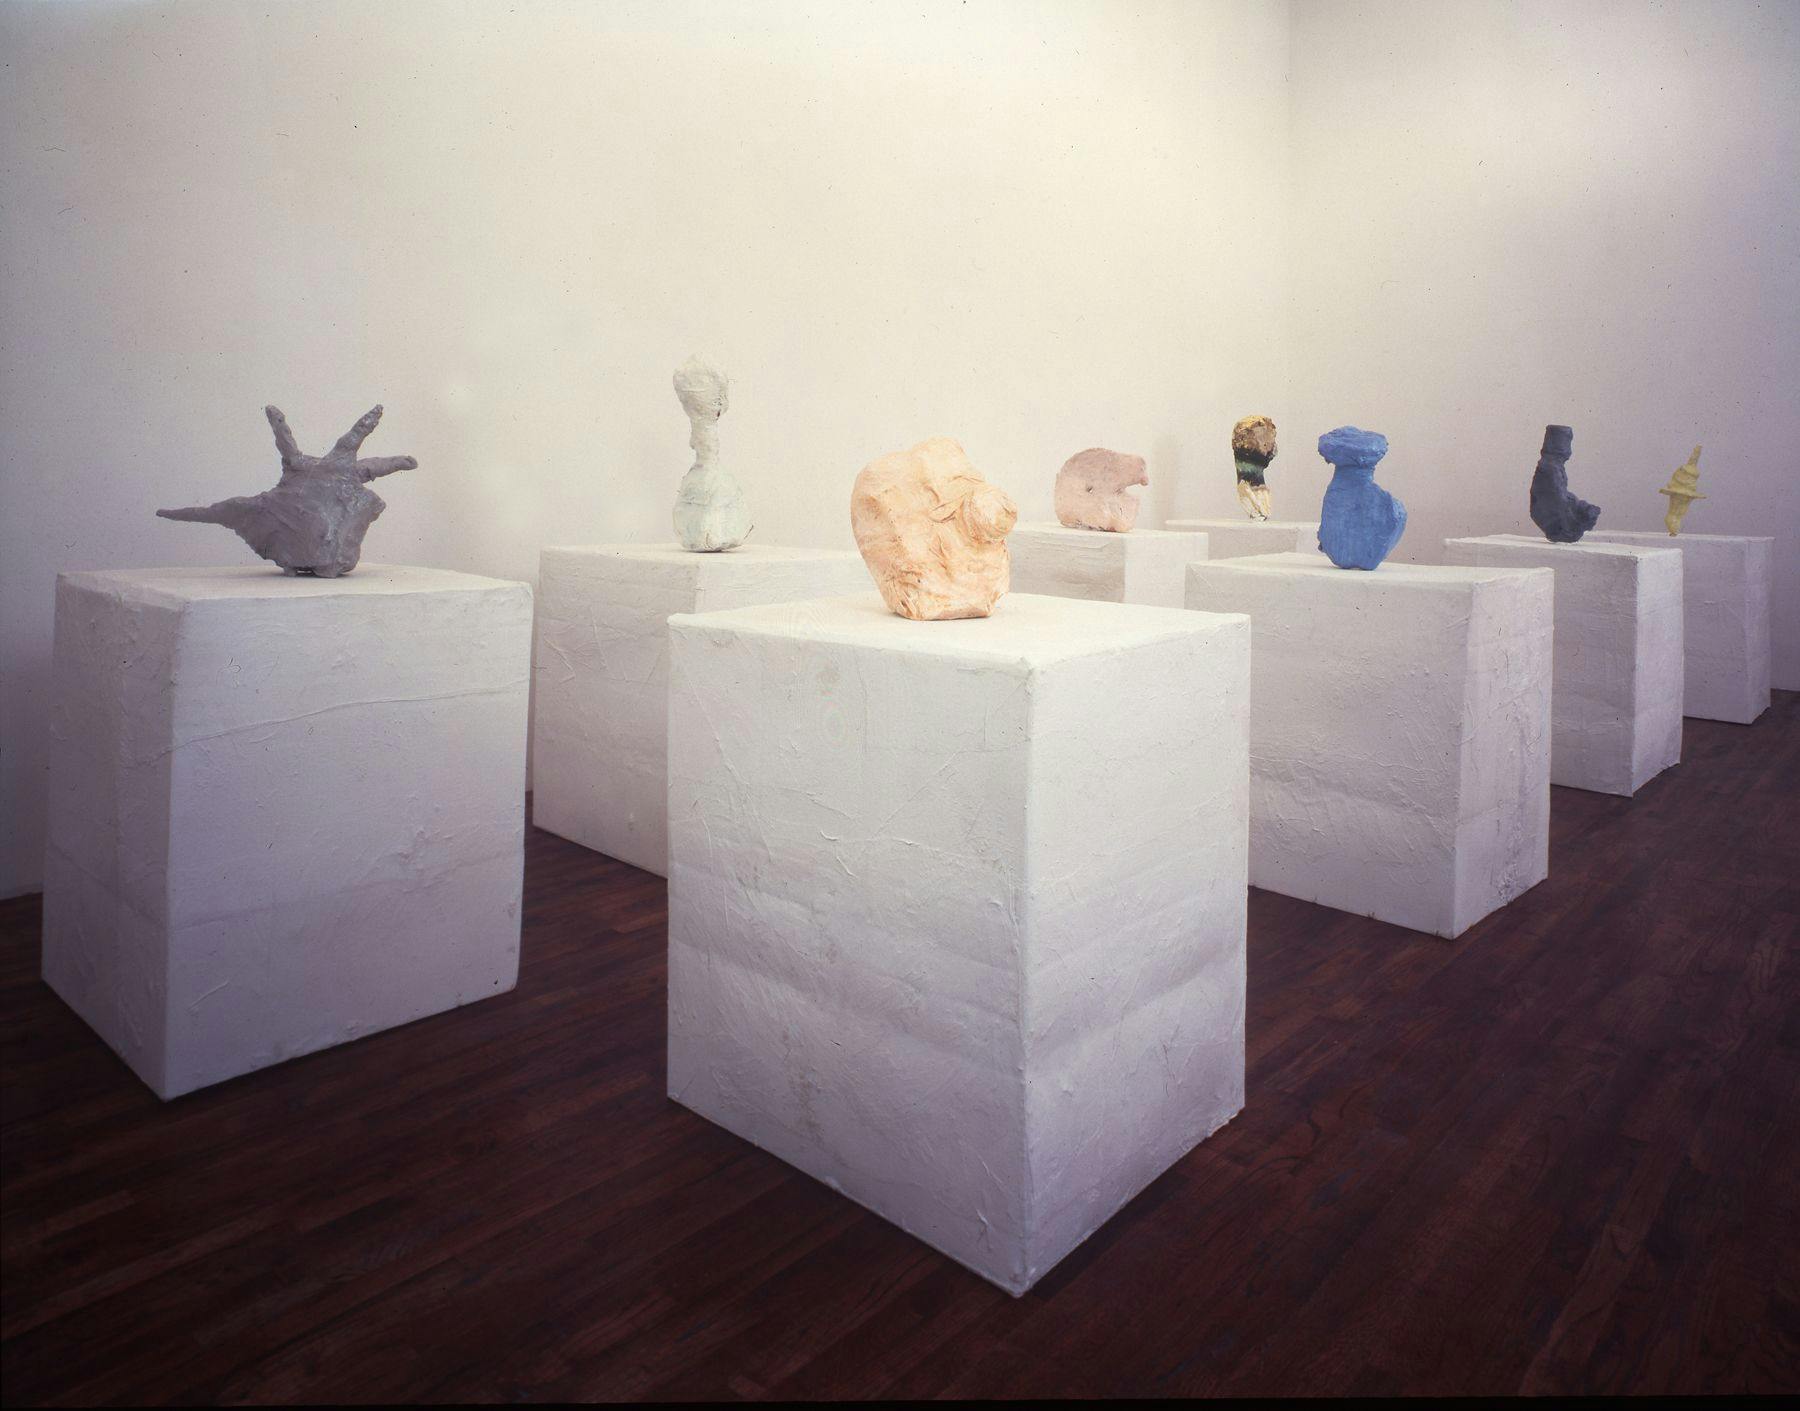 An installation view of the exhibition Franz West: Investigations of American Art, at David Zwirner New York, dated 1993.